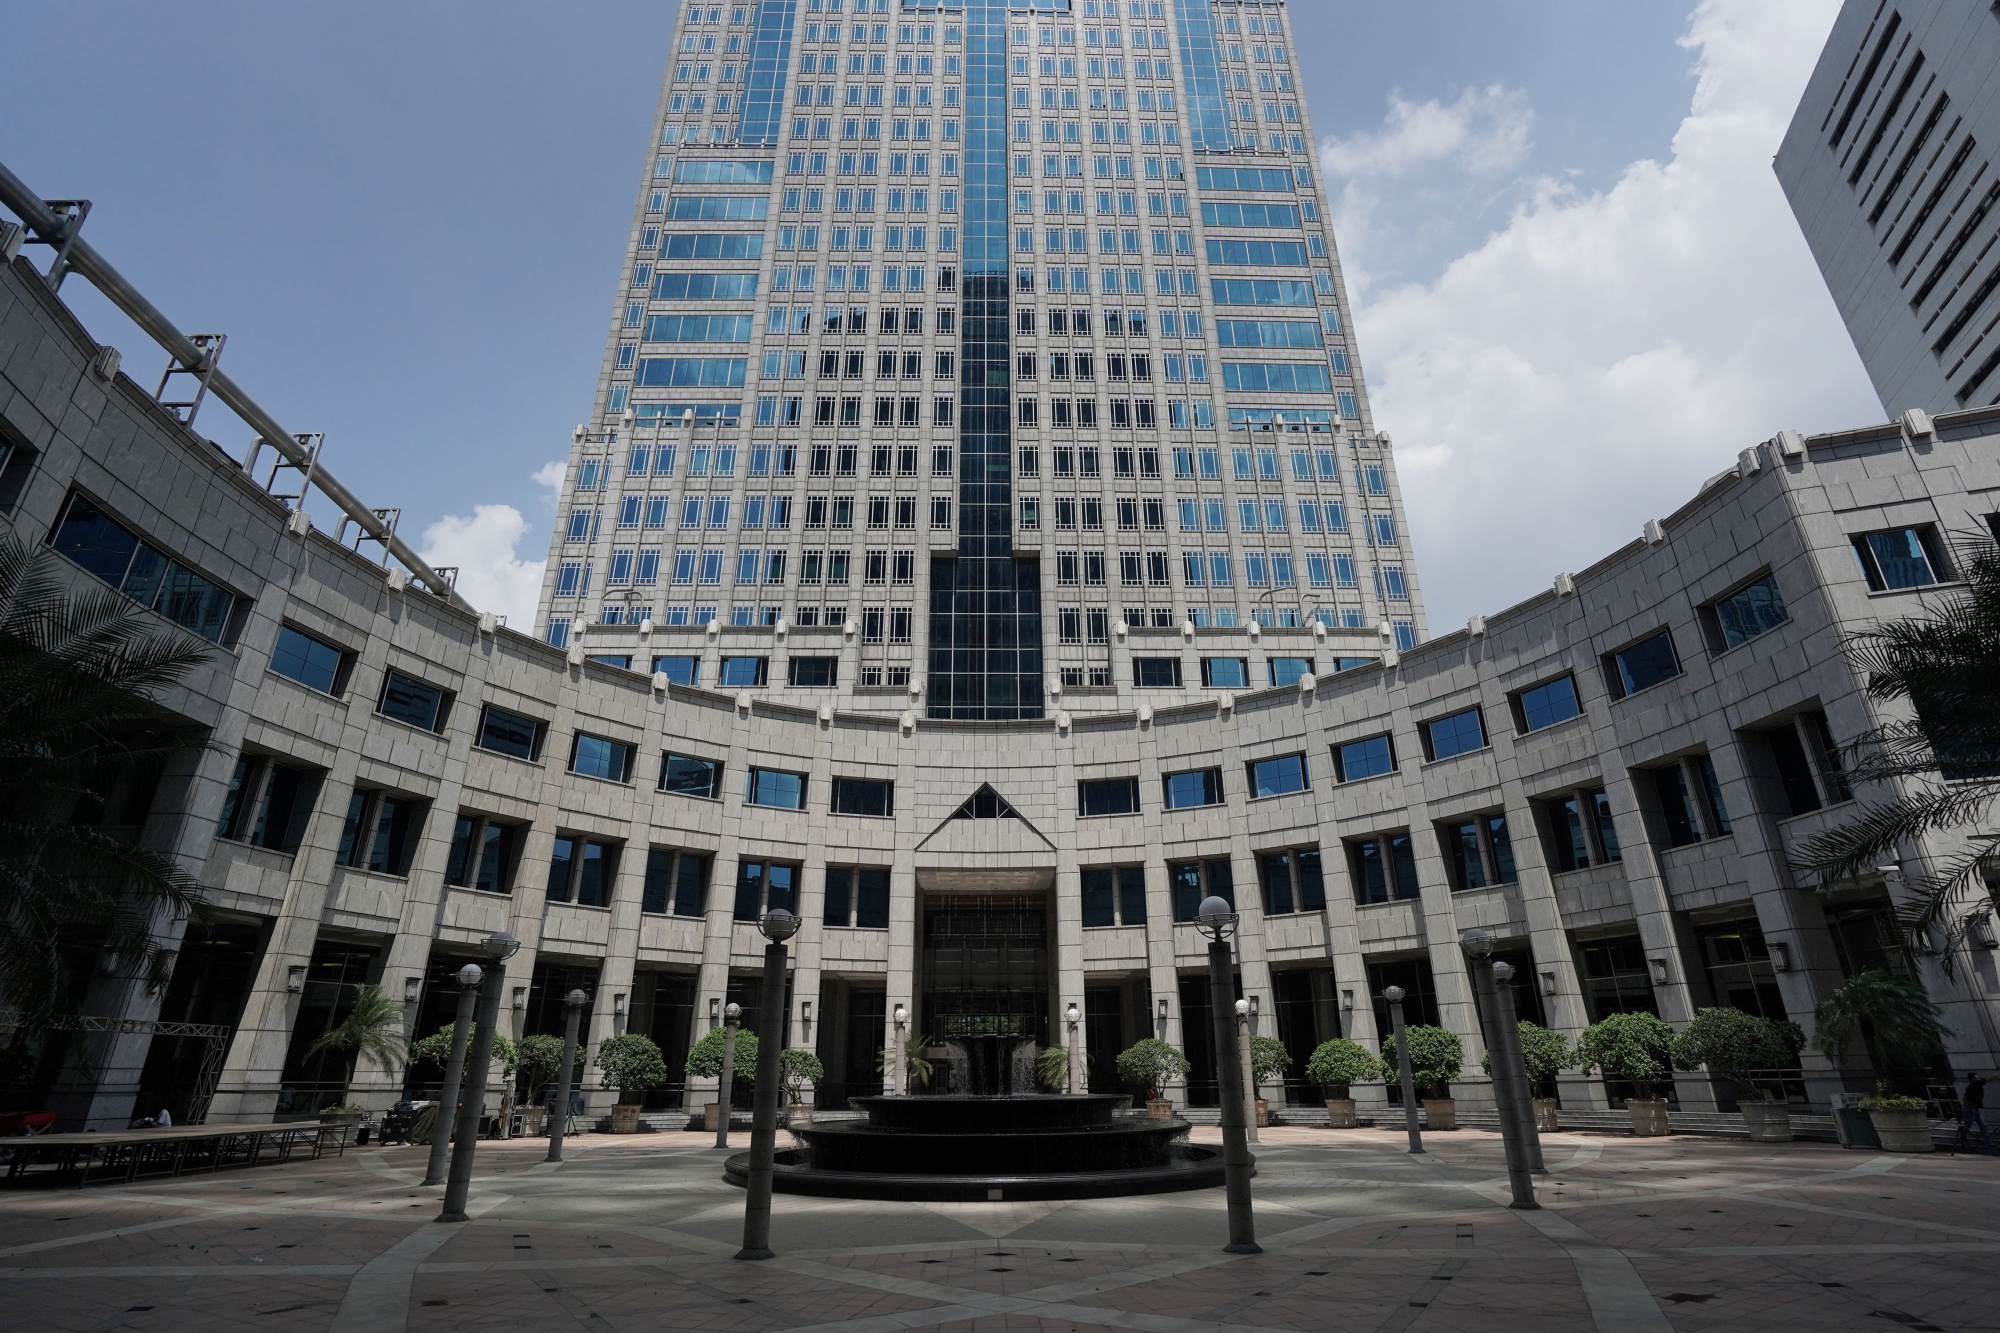 The Bank Indonesia headquarters in Jakarta, Indonesia.